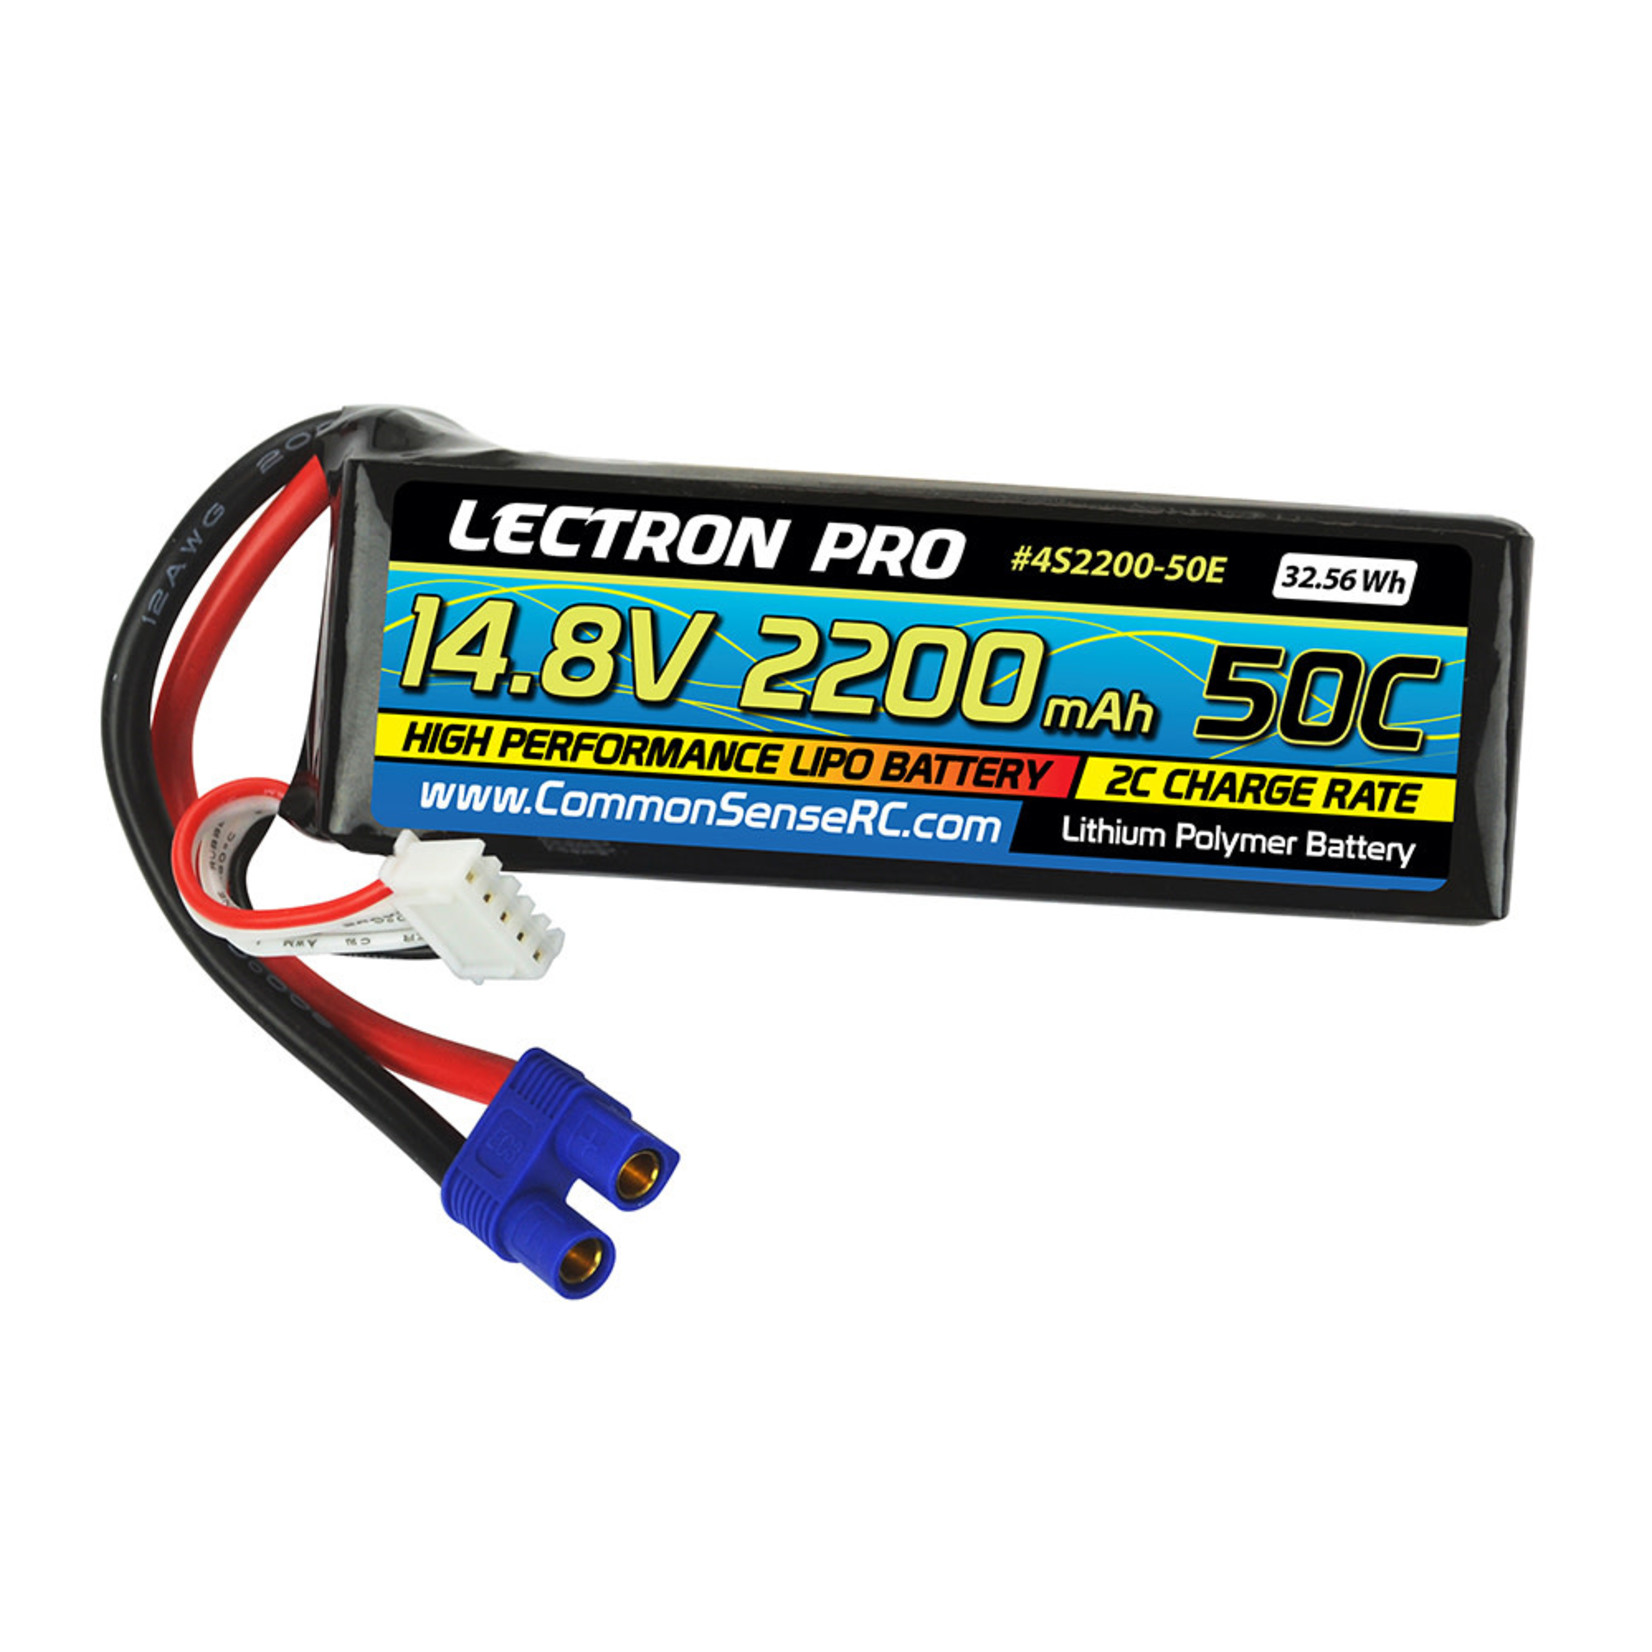 Lectron Pro Lectron Pro 14.8V 2200mAh 50C with EC3 Con